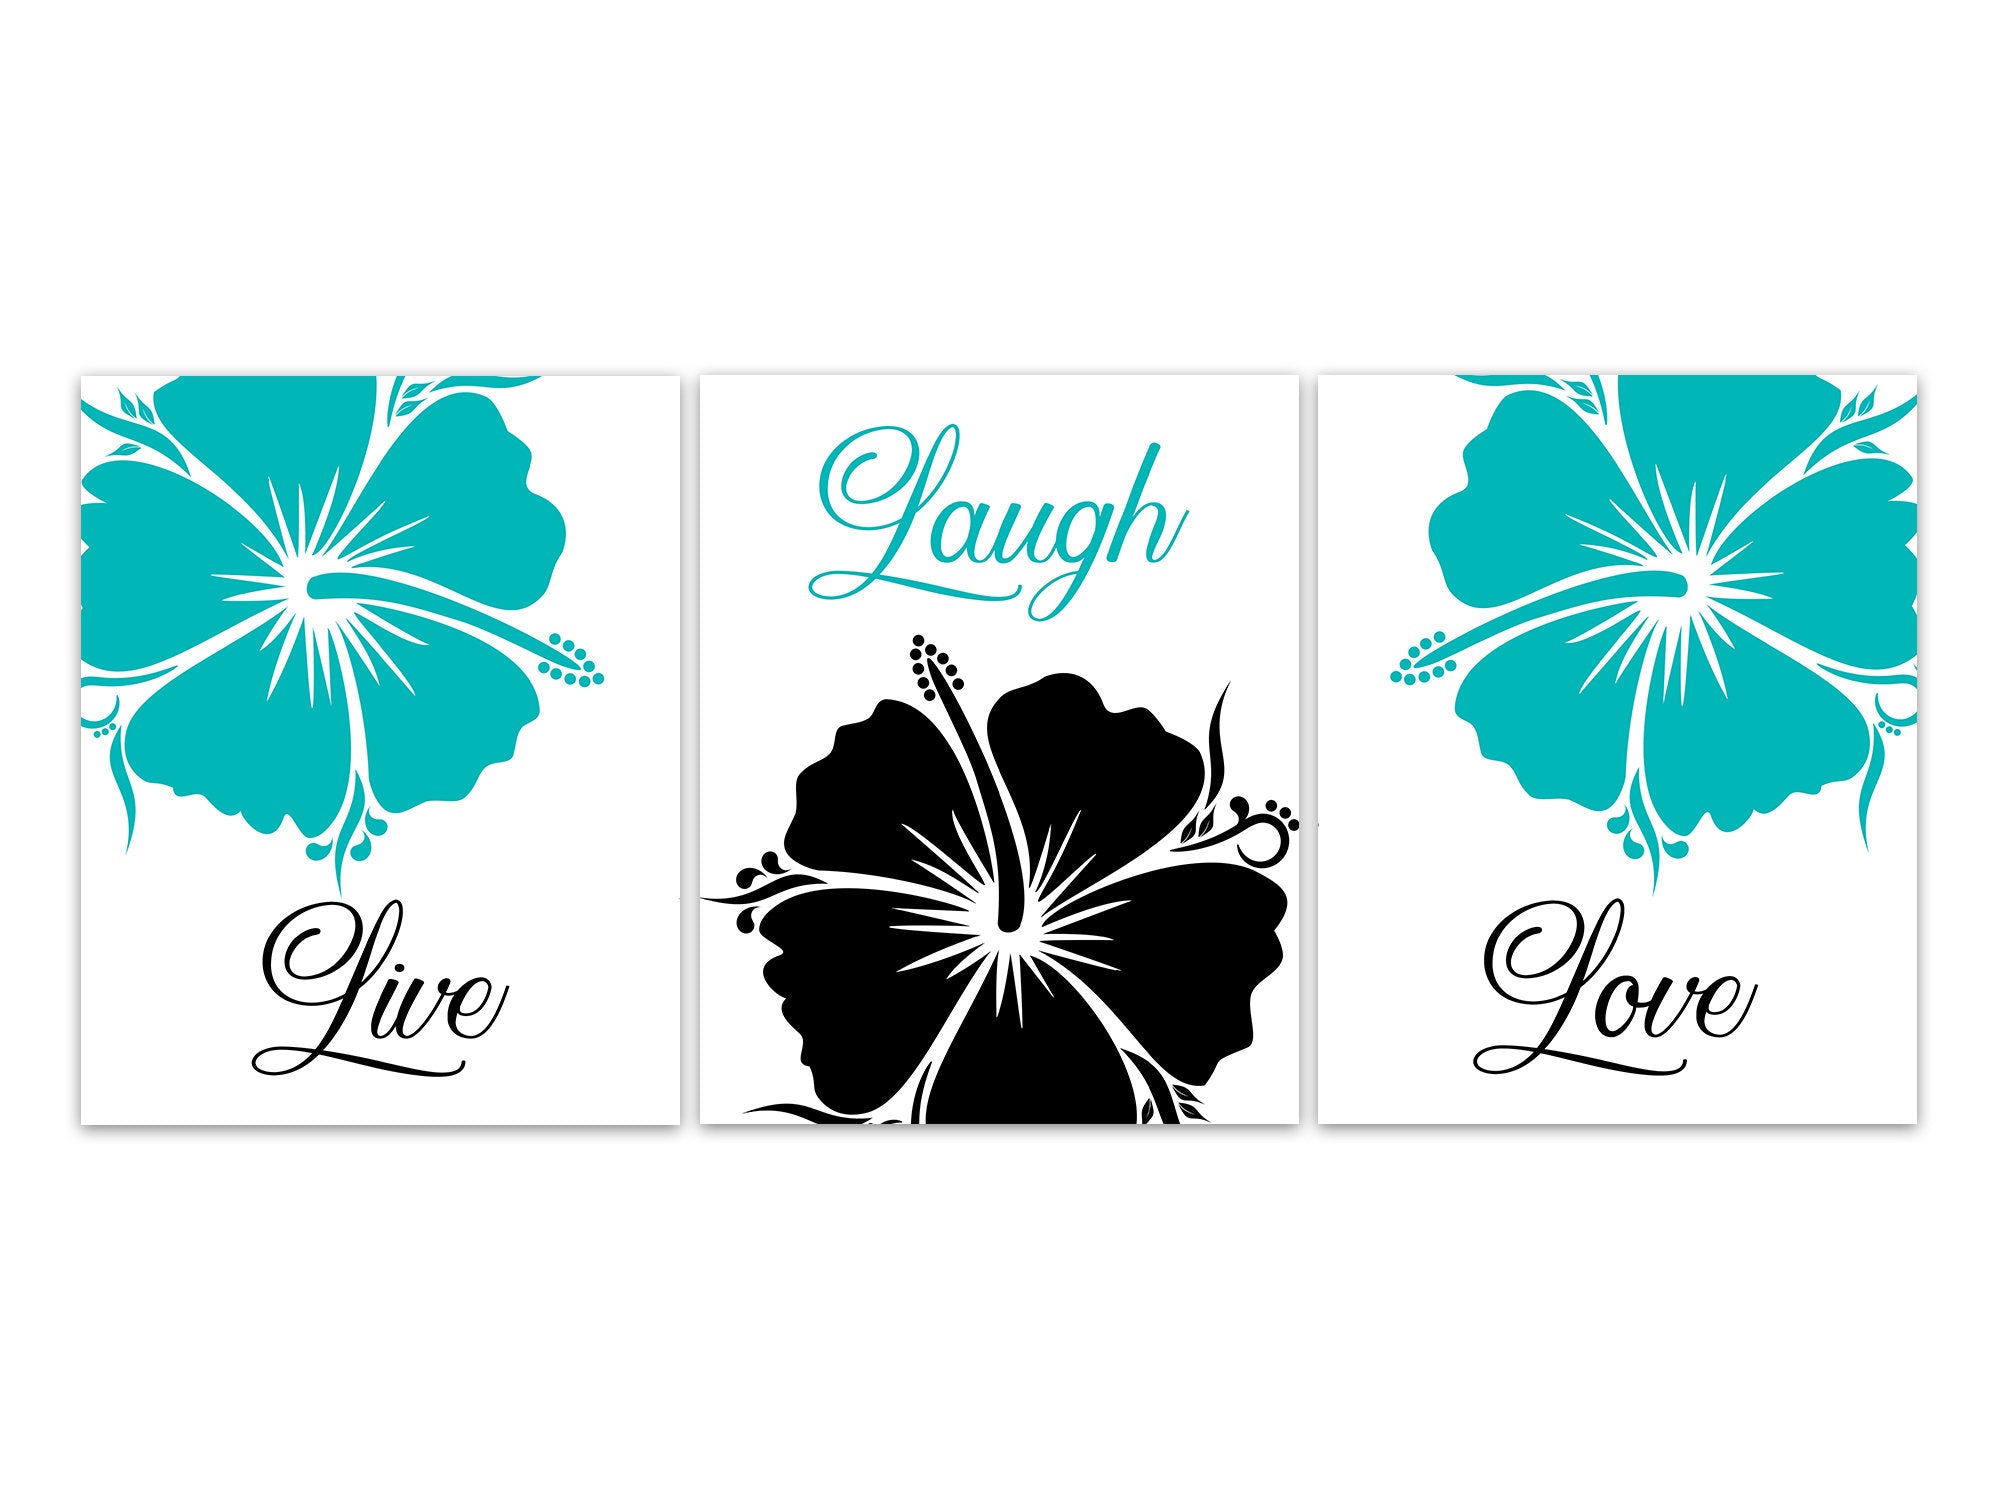 Turquoise Home Decor, Live Laugh Love CANVAS or PRINTS, Teal and Black Bedroom Wall Art, Hibiscus Bedroom Decor, Tropical Decor - HOME659